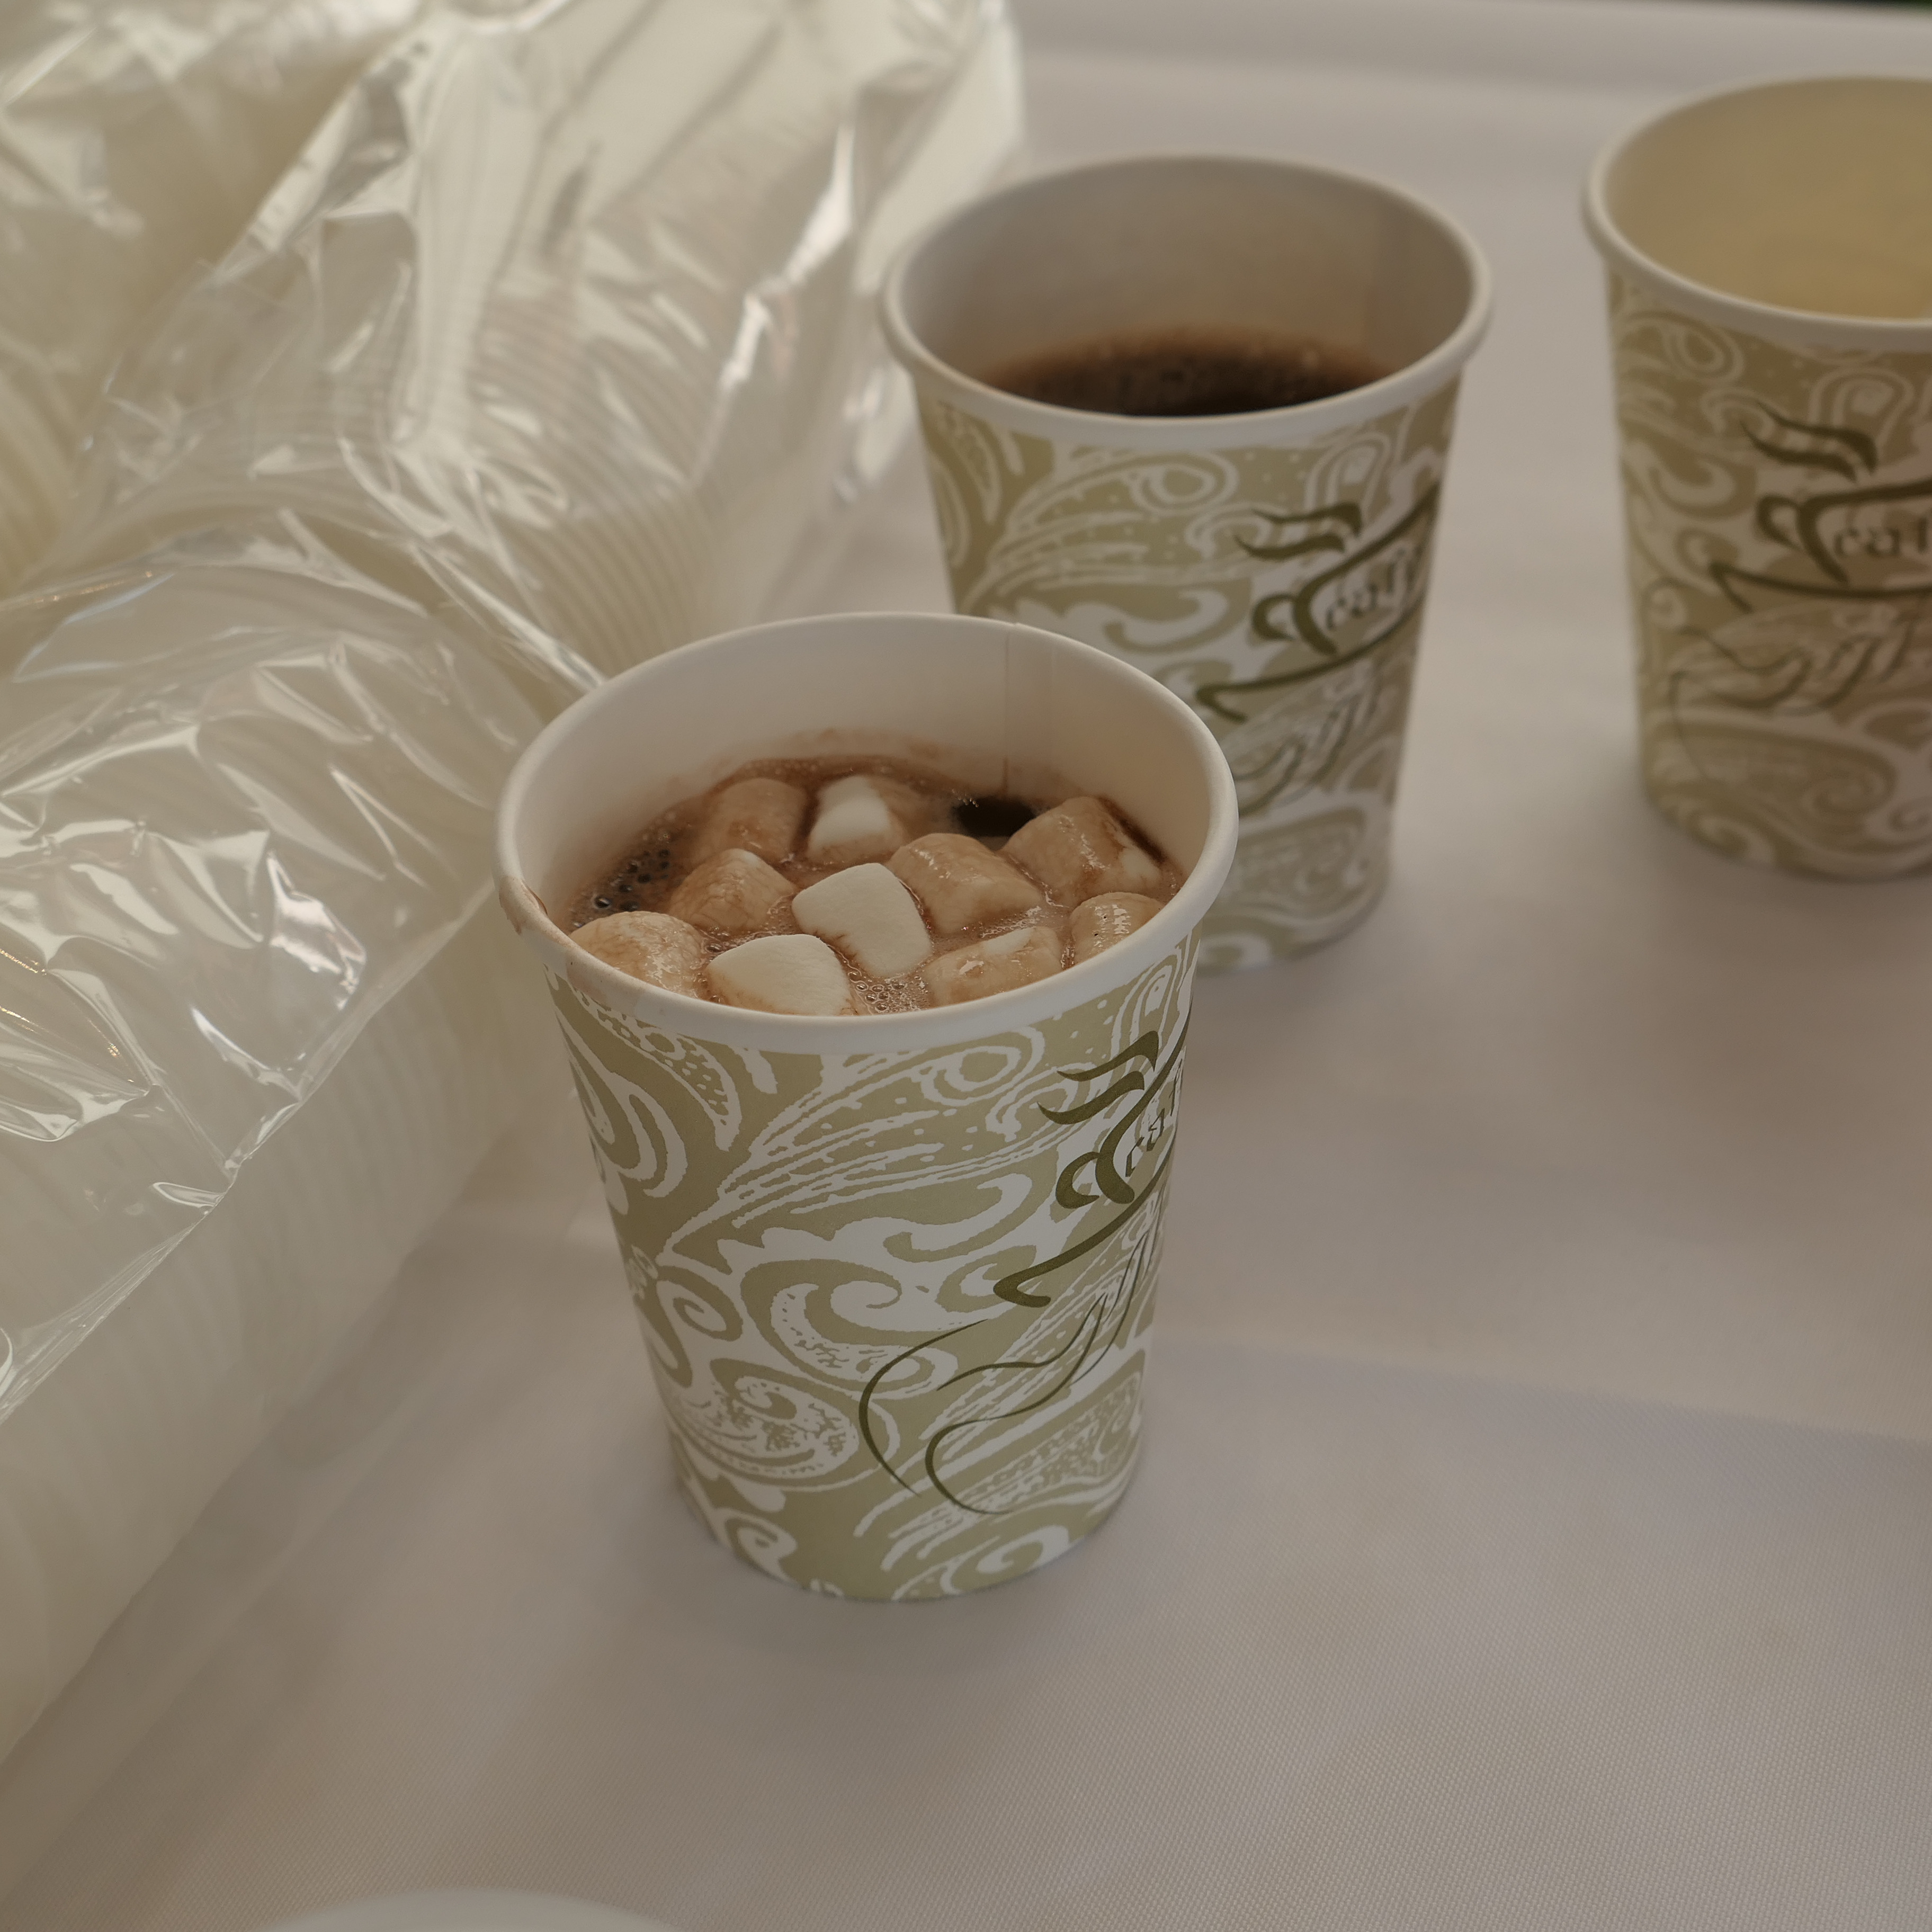 cups with hot chocolate and marshmallows 